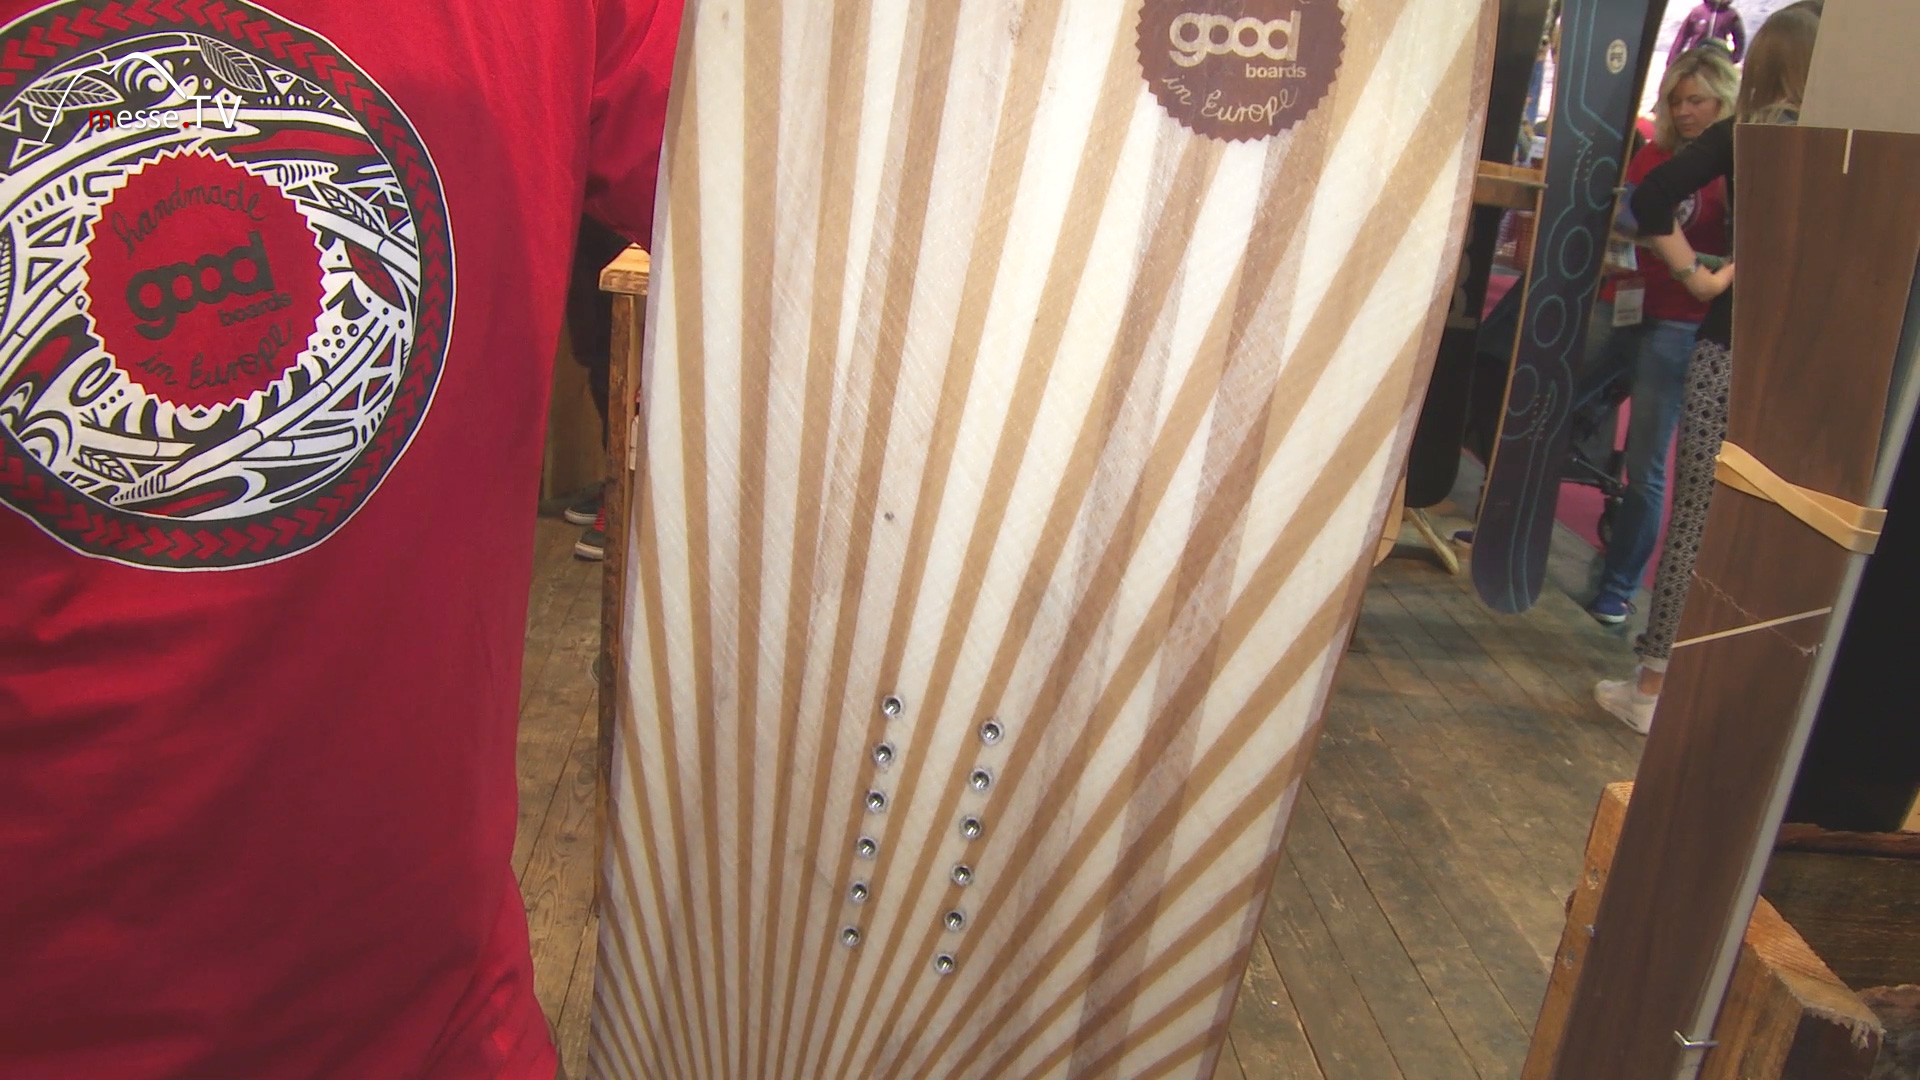 Snowboards with wood core great design